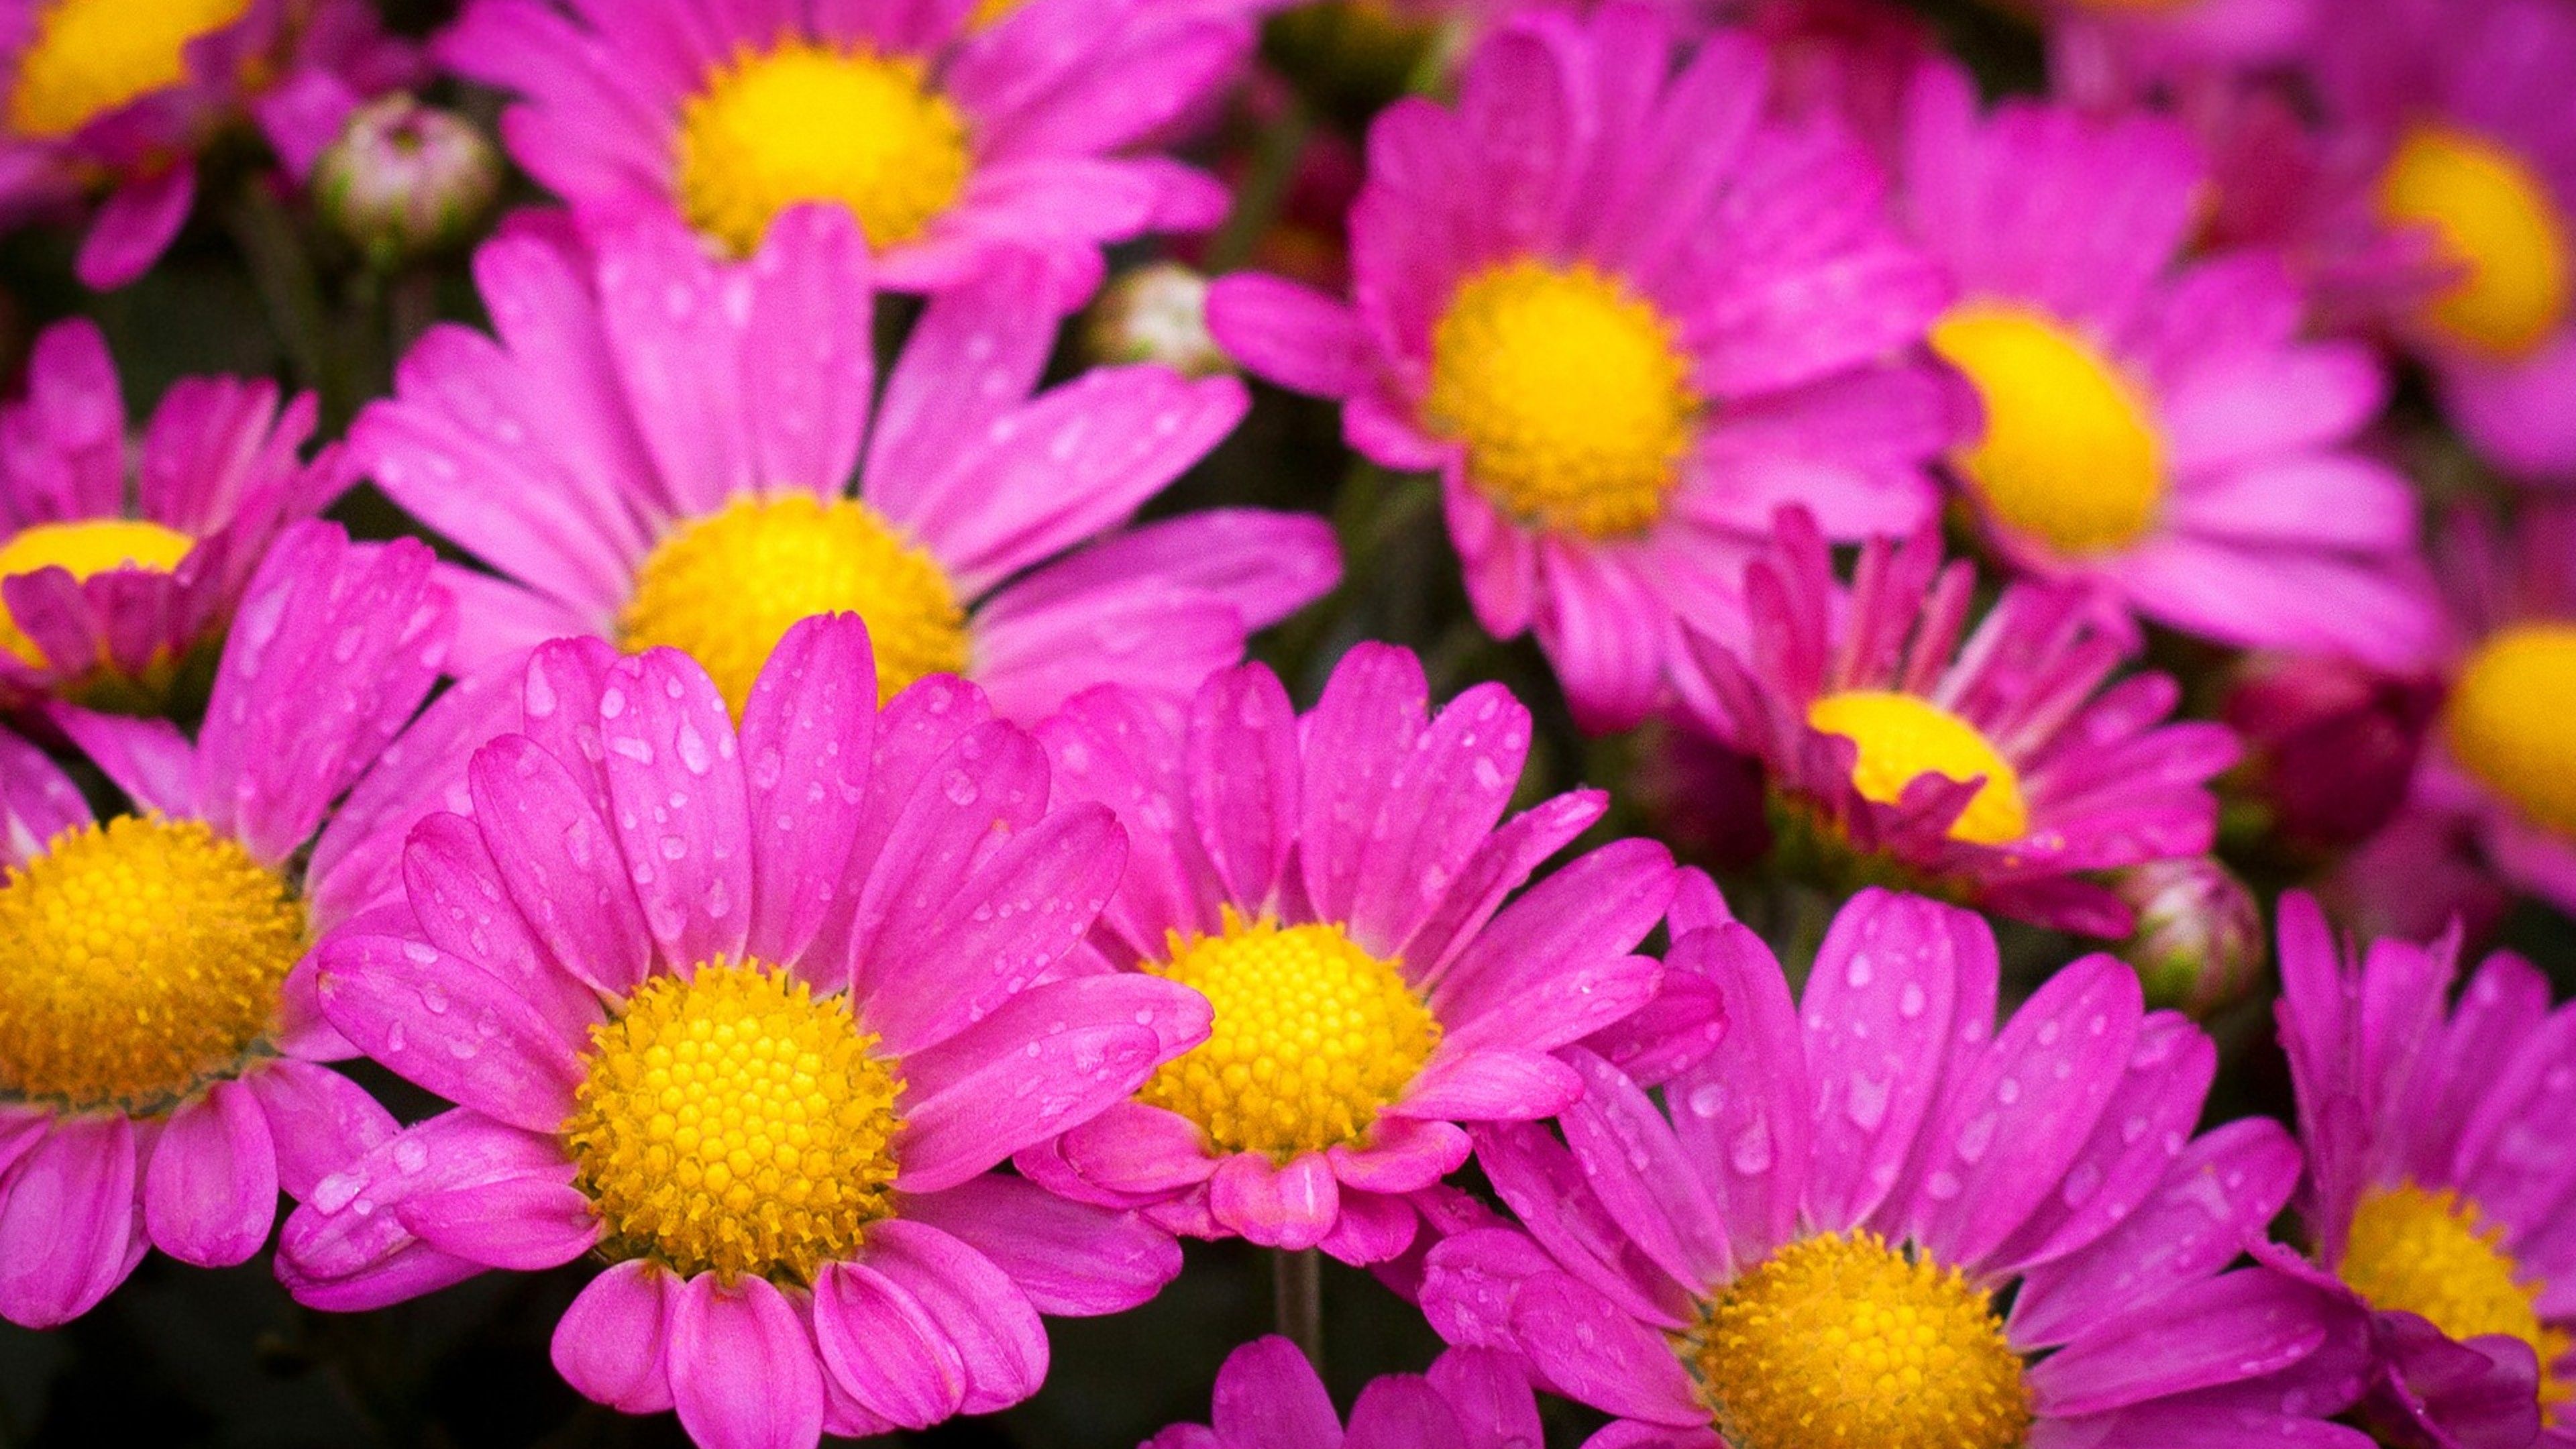 Water Drops On Pink Daisies, HD Flowers, 4k Wallpaper, Image, Background, Photo and Picture